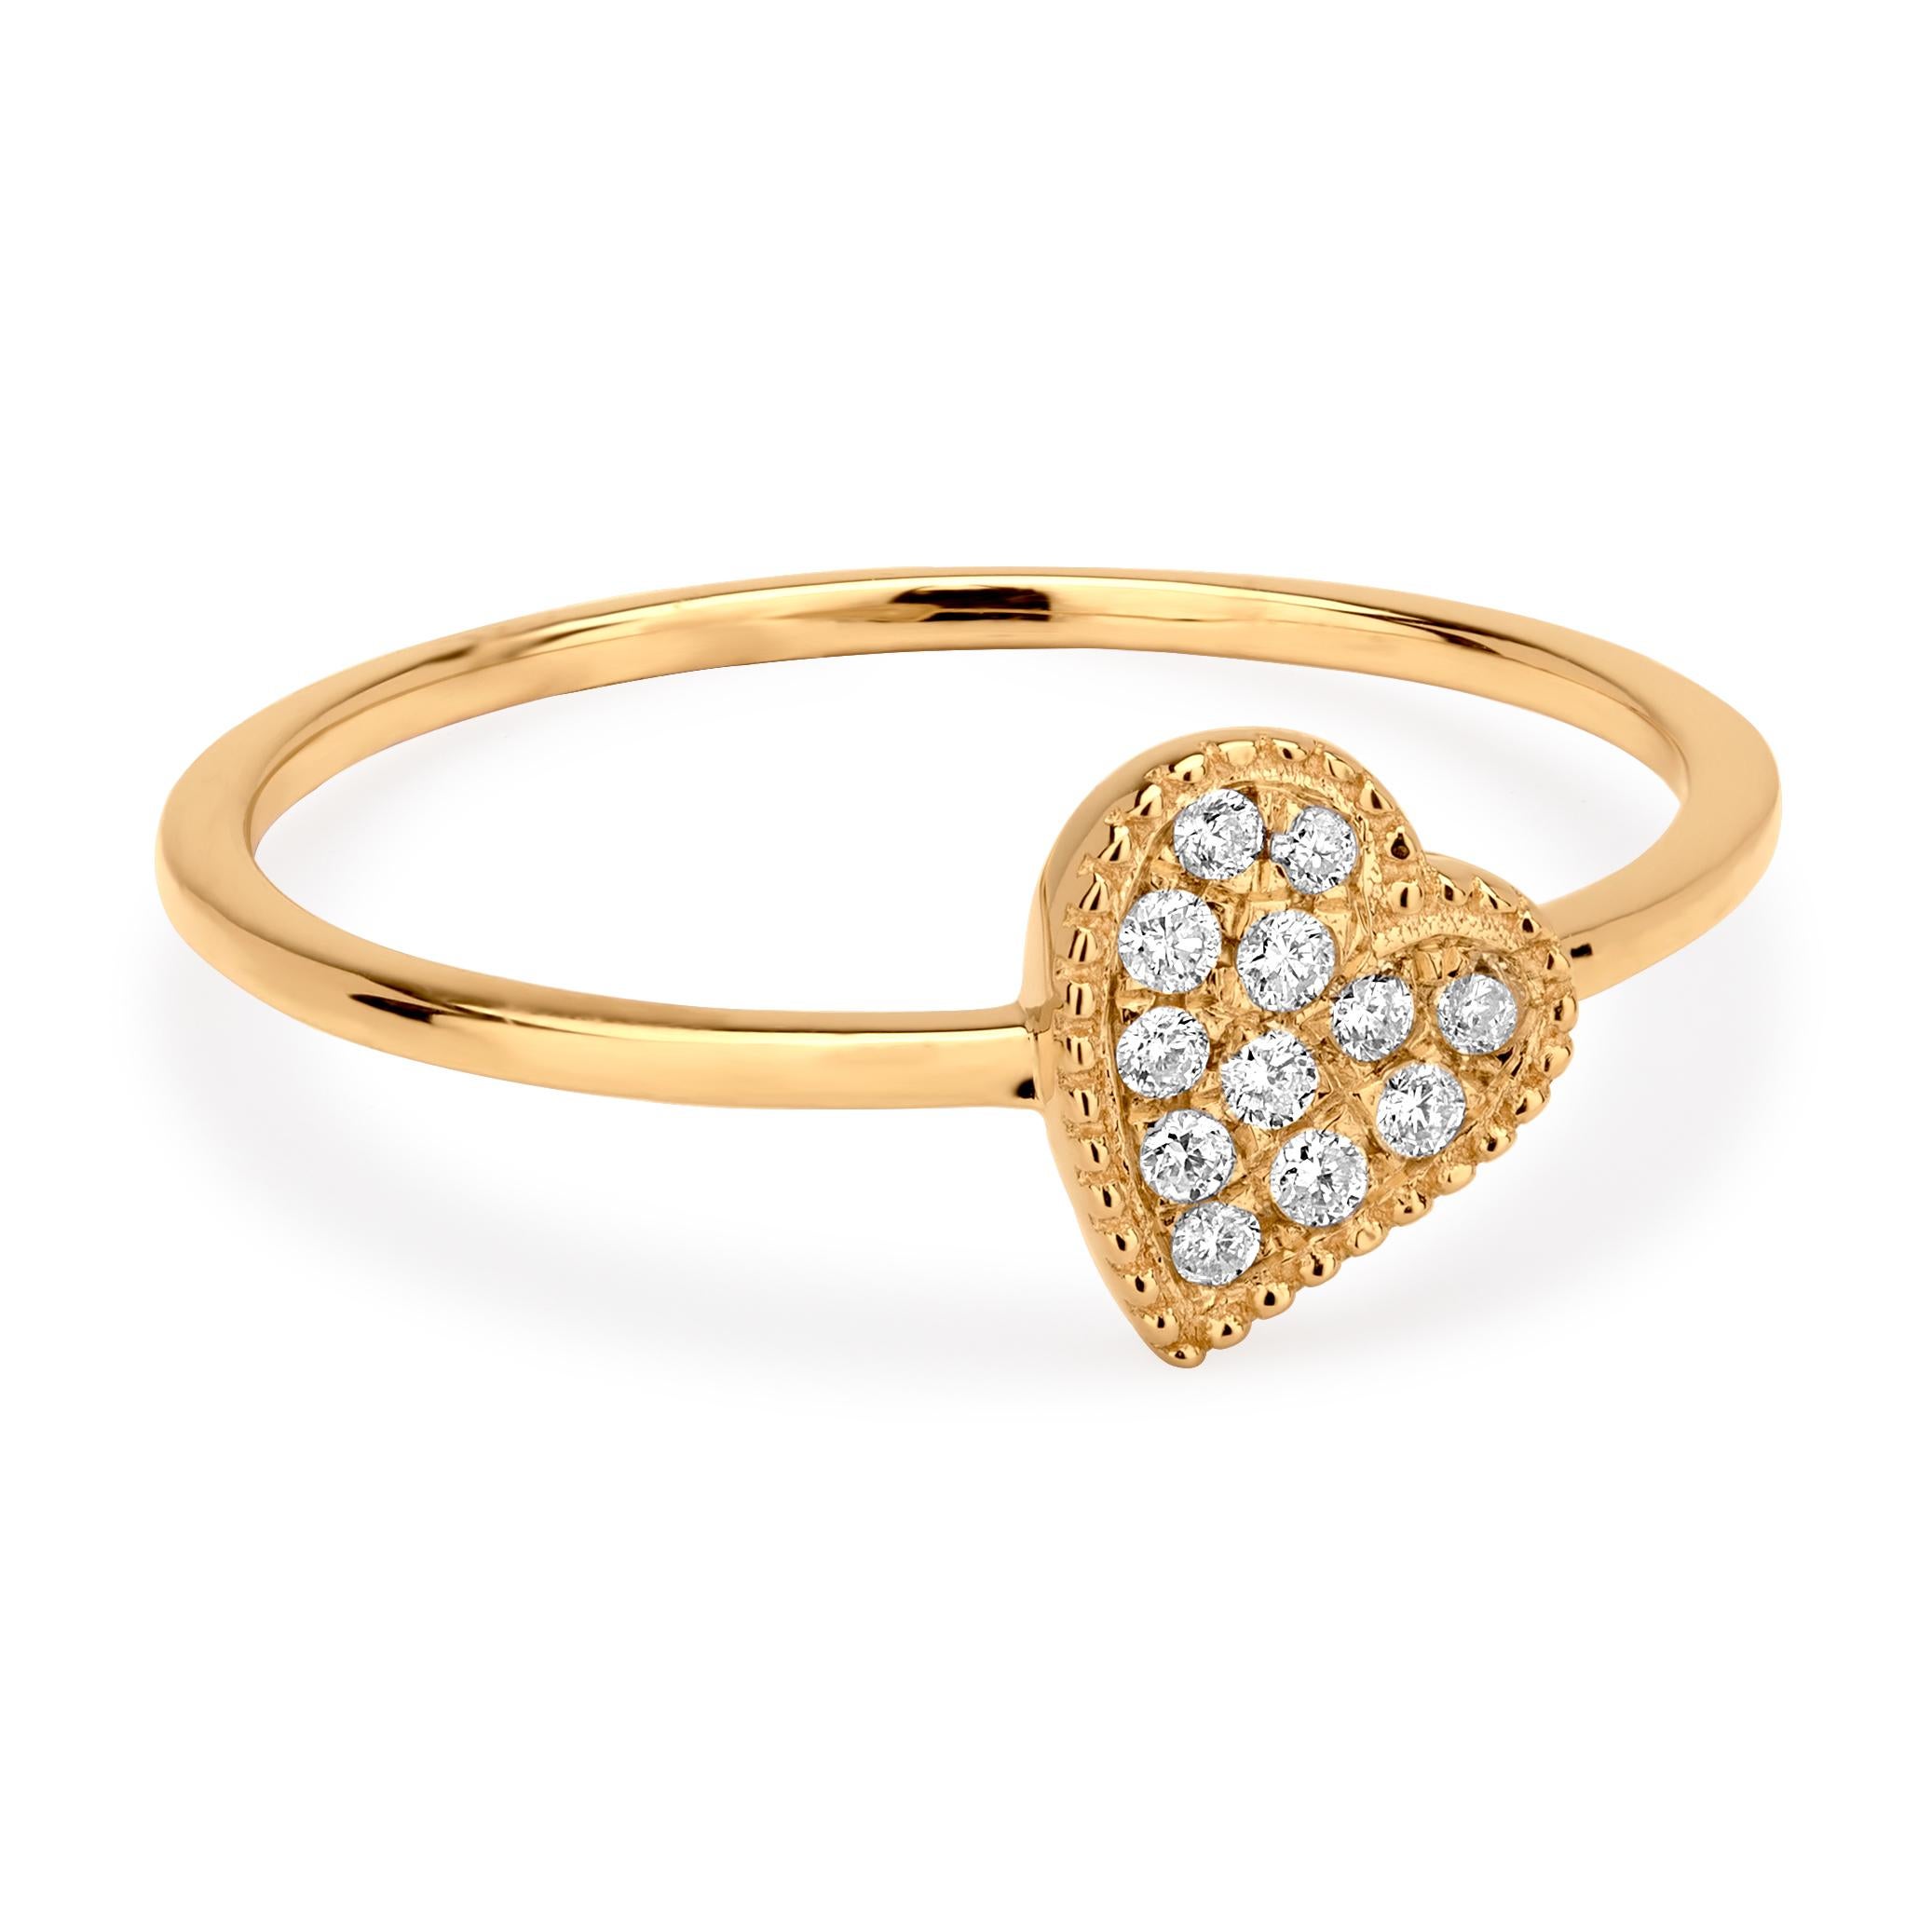 Contemporary Luxle Diamond Heart Ring in 18K Yellow Gold